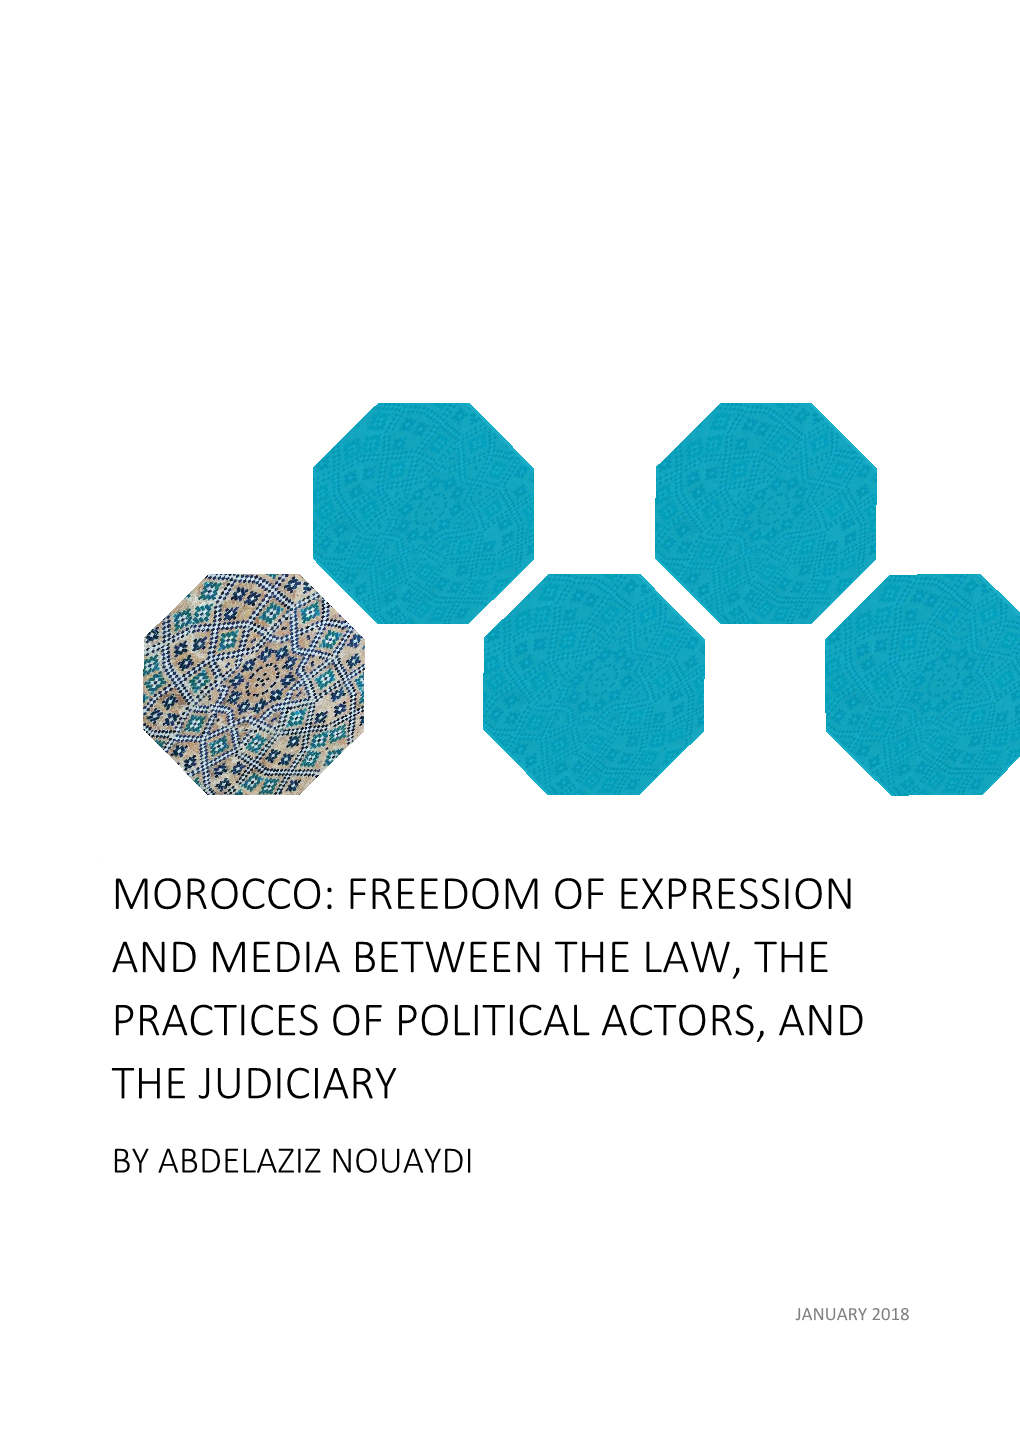 Morocco: Freedom of Expression and Media Between the Law, the Practices of Political Actors, and the Judiciary by Abdelaziz Nouaydi